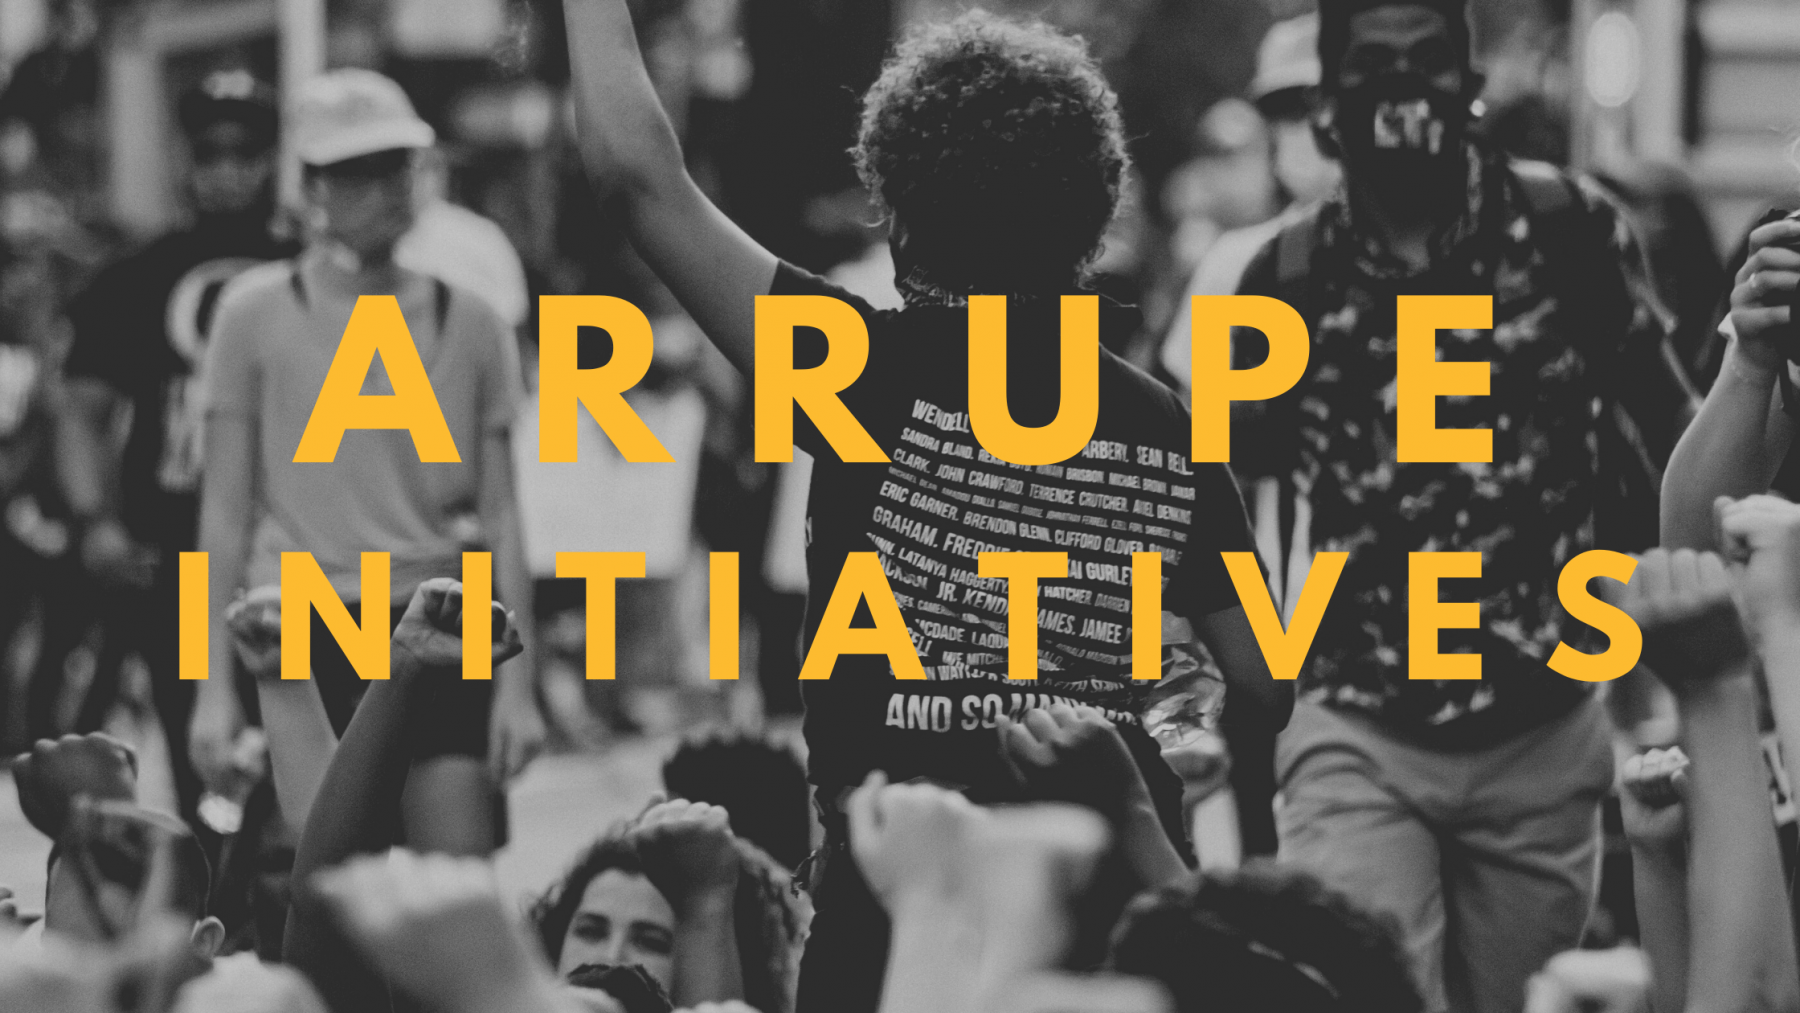 Arrupe Initiatives over raised fists